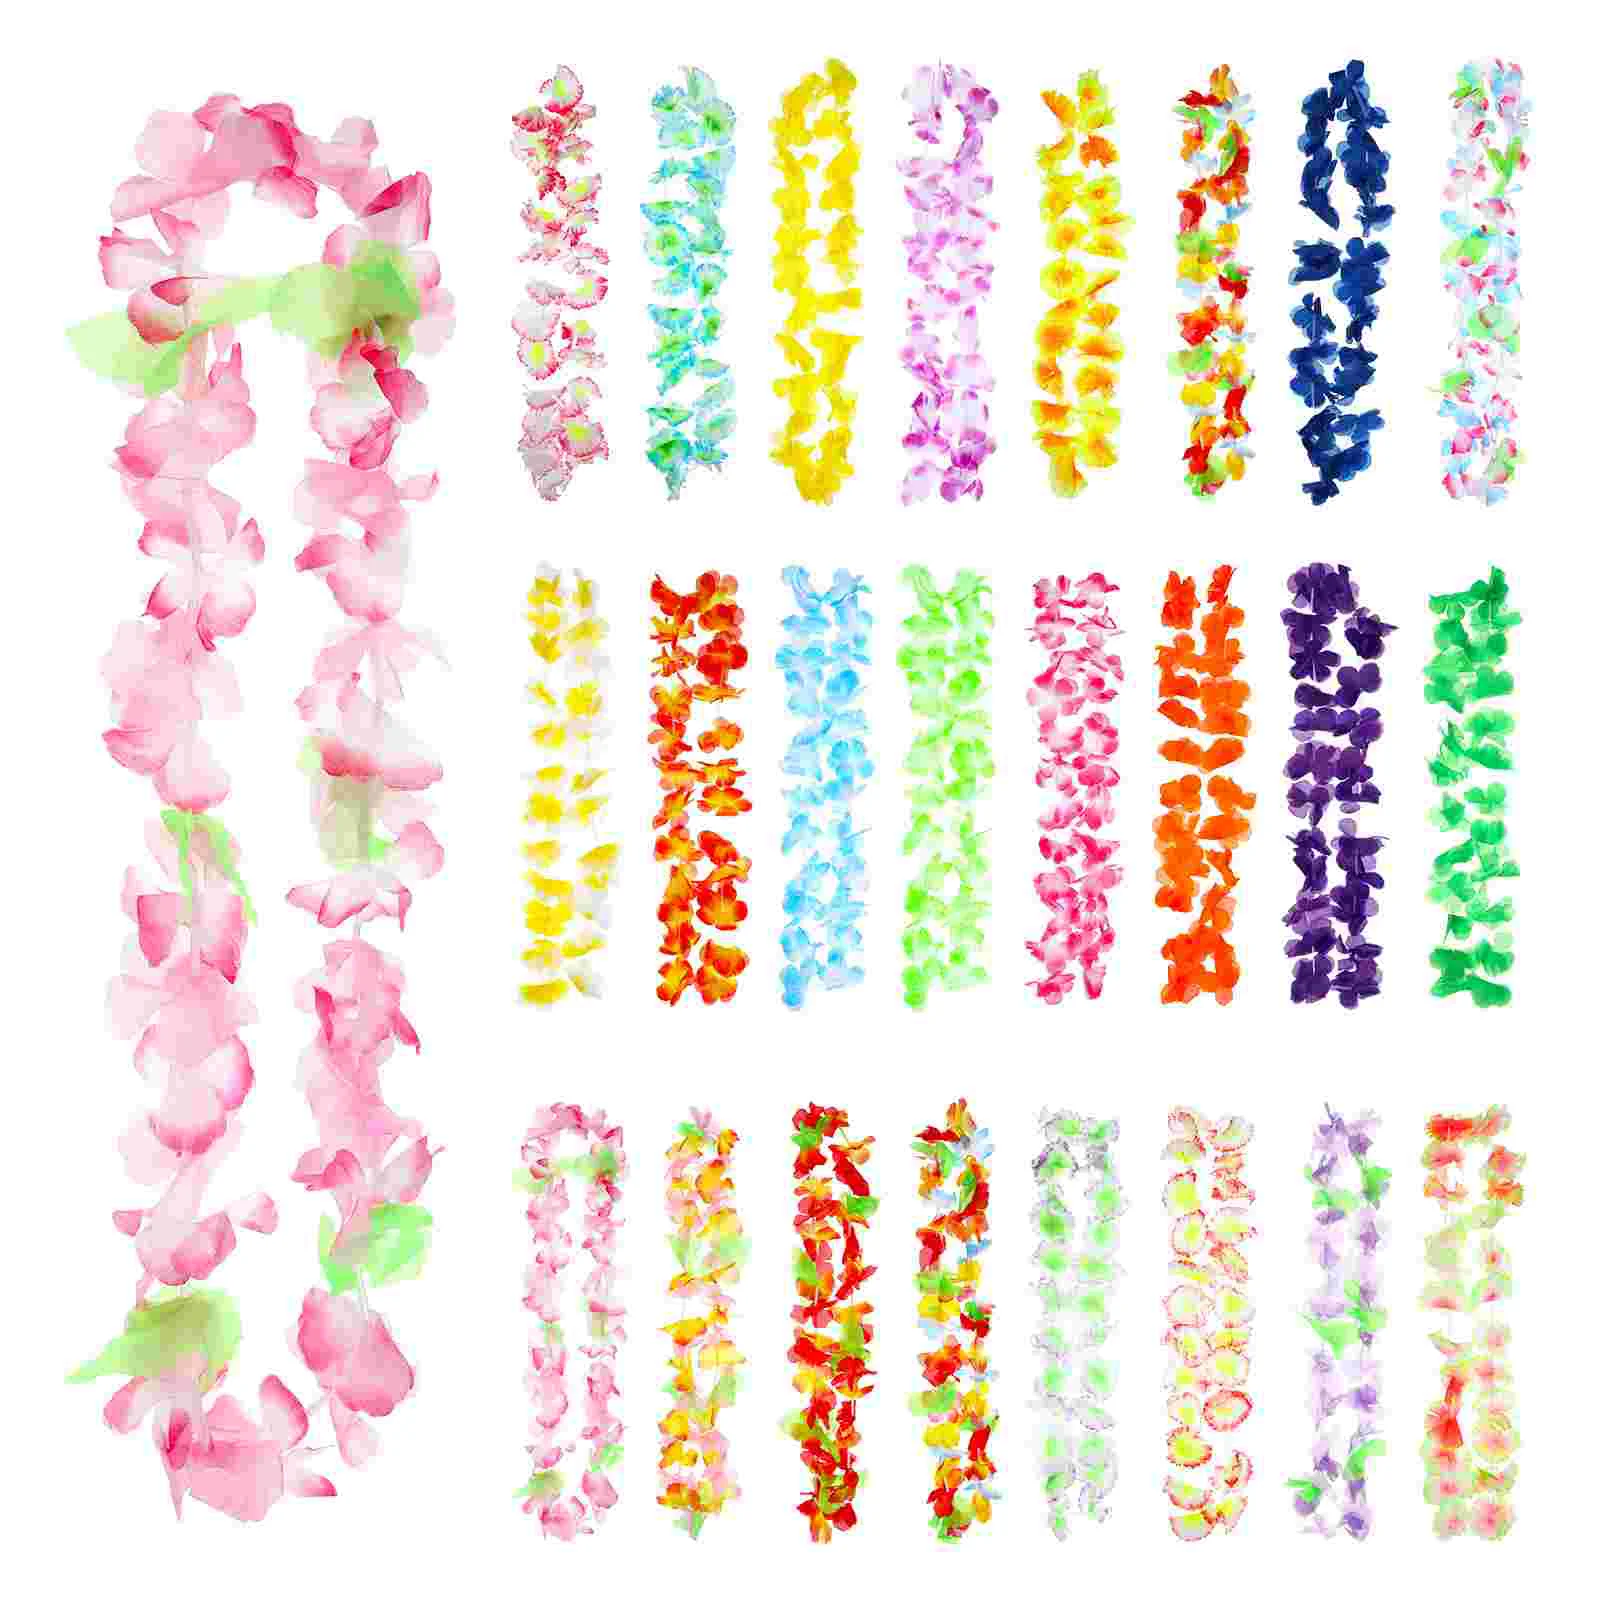 

50 Pack Hawaiian Leis Necklace Colorful Tropical Flower Leis Wreaths Lei Garlands for Luau Dance Party Favors Birthday Wedding